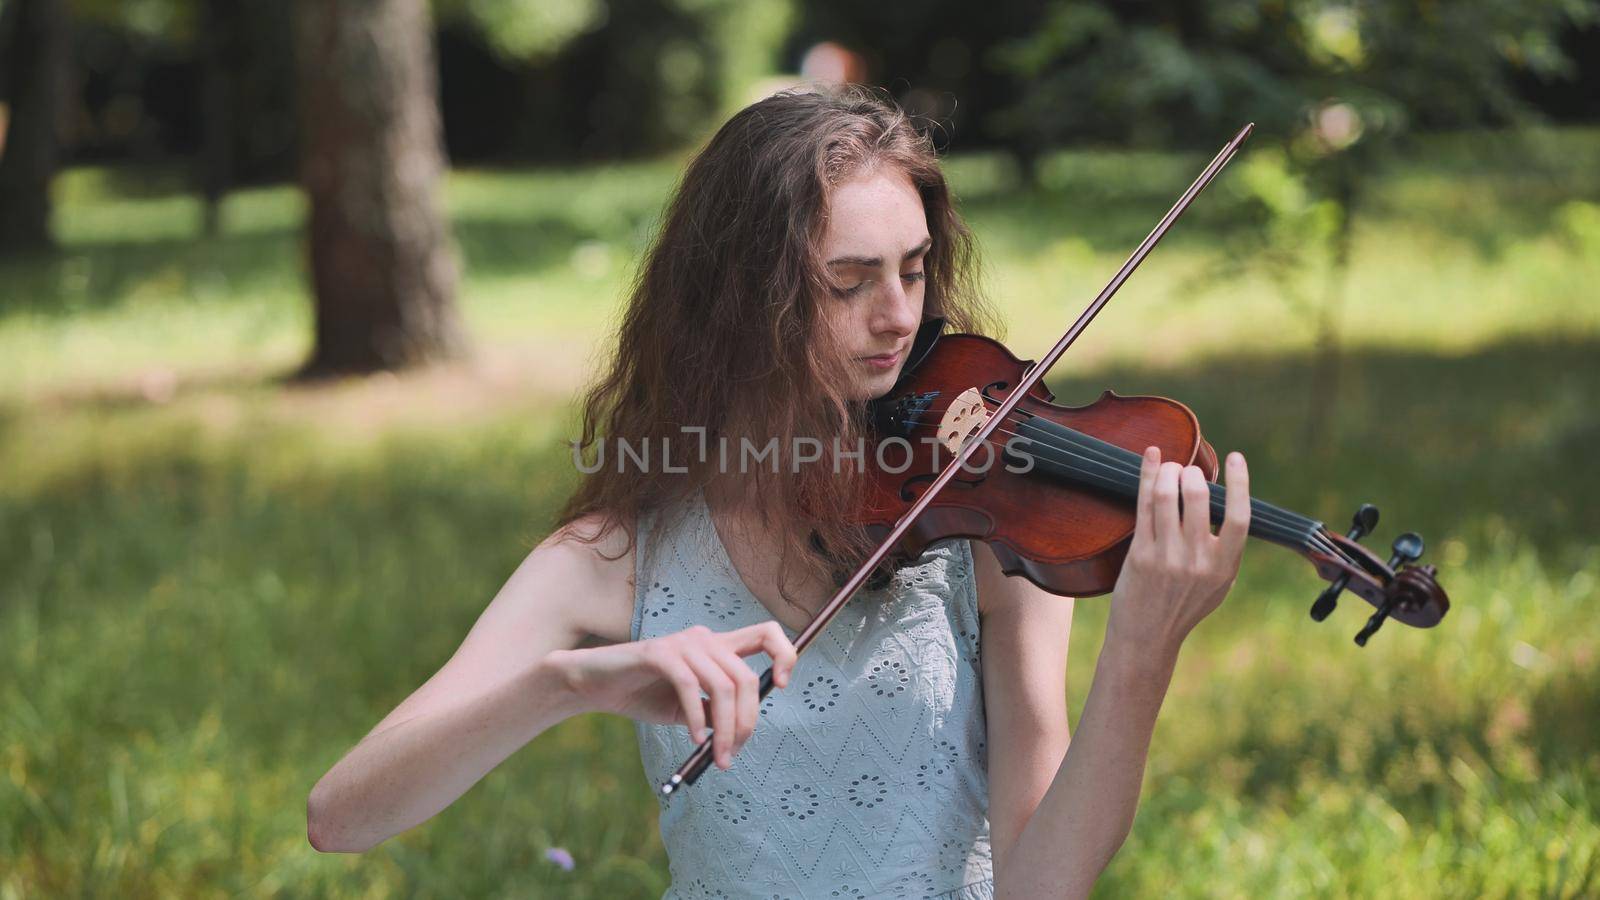 A young girl plays the violin in the city park. by DovidPro